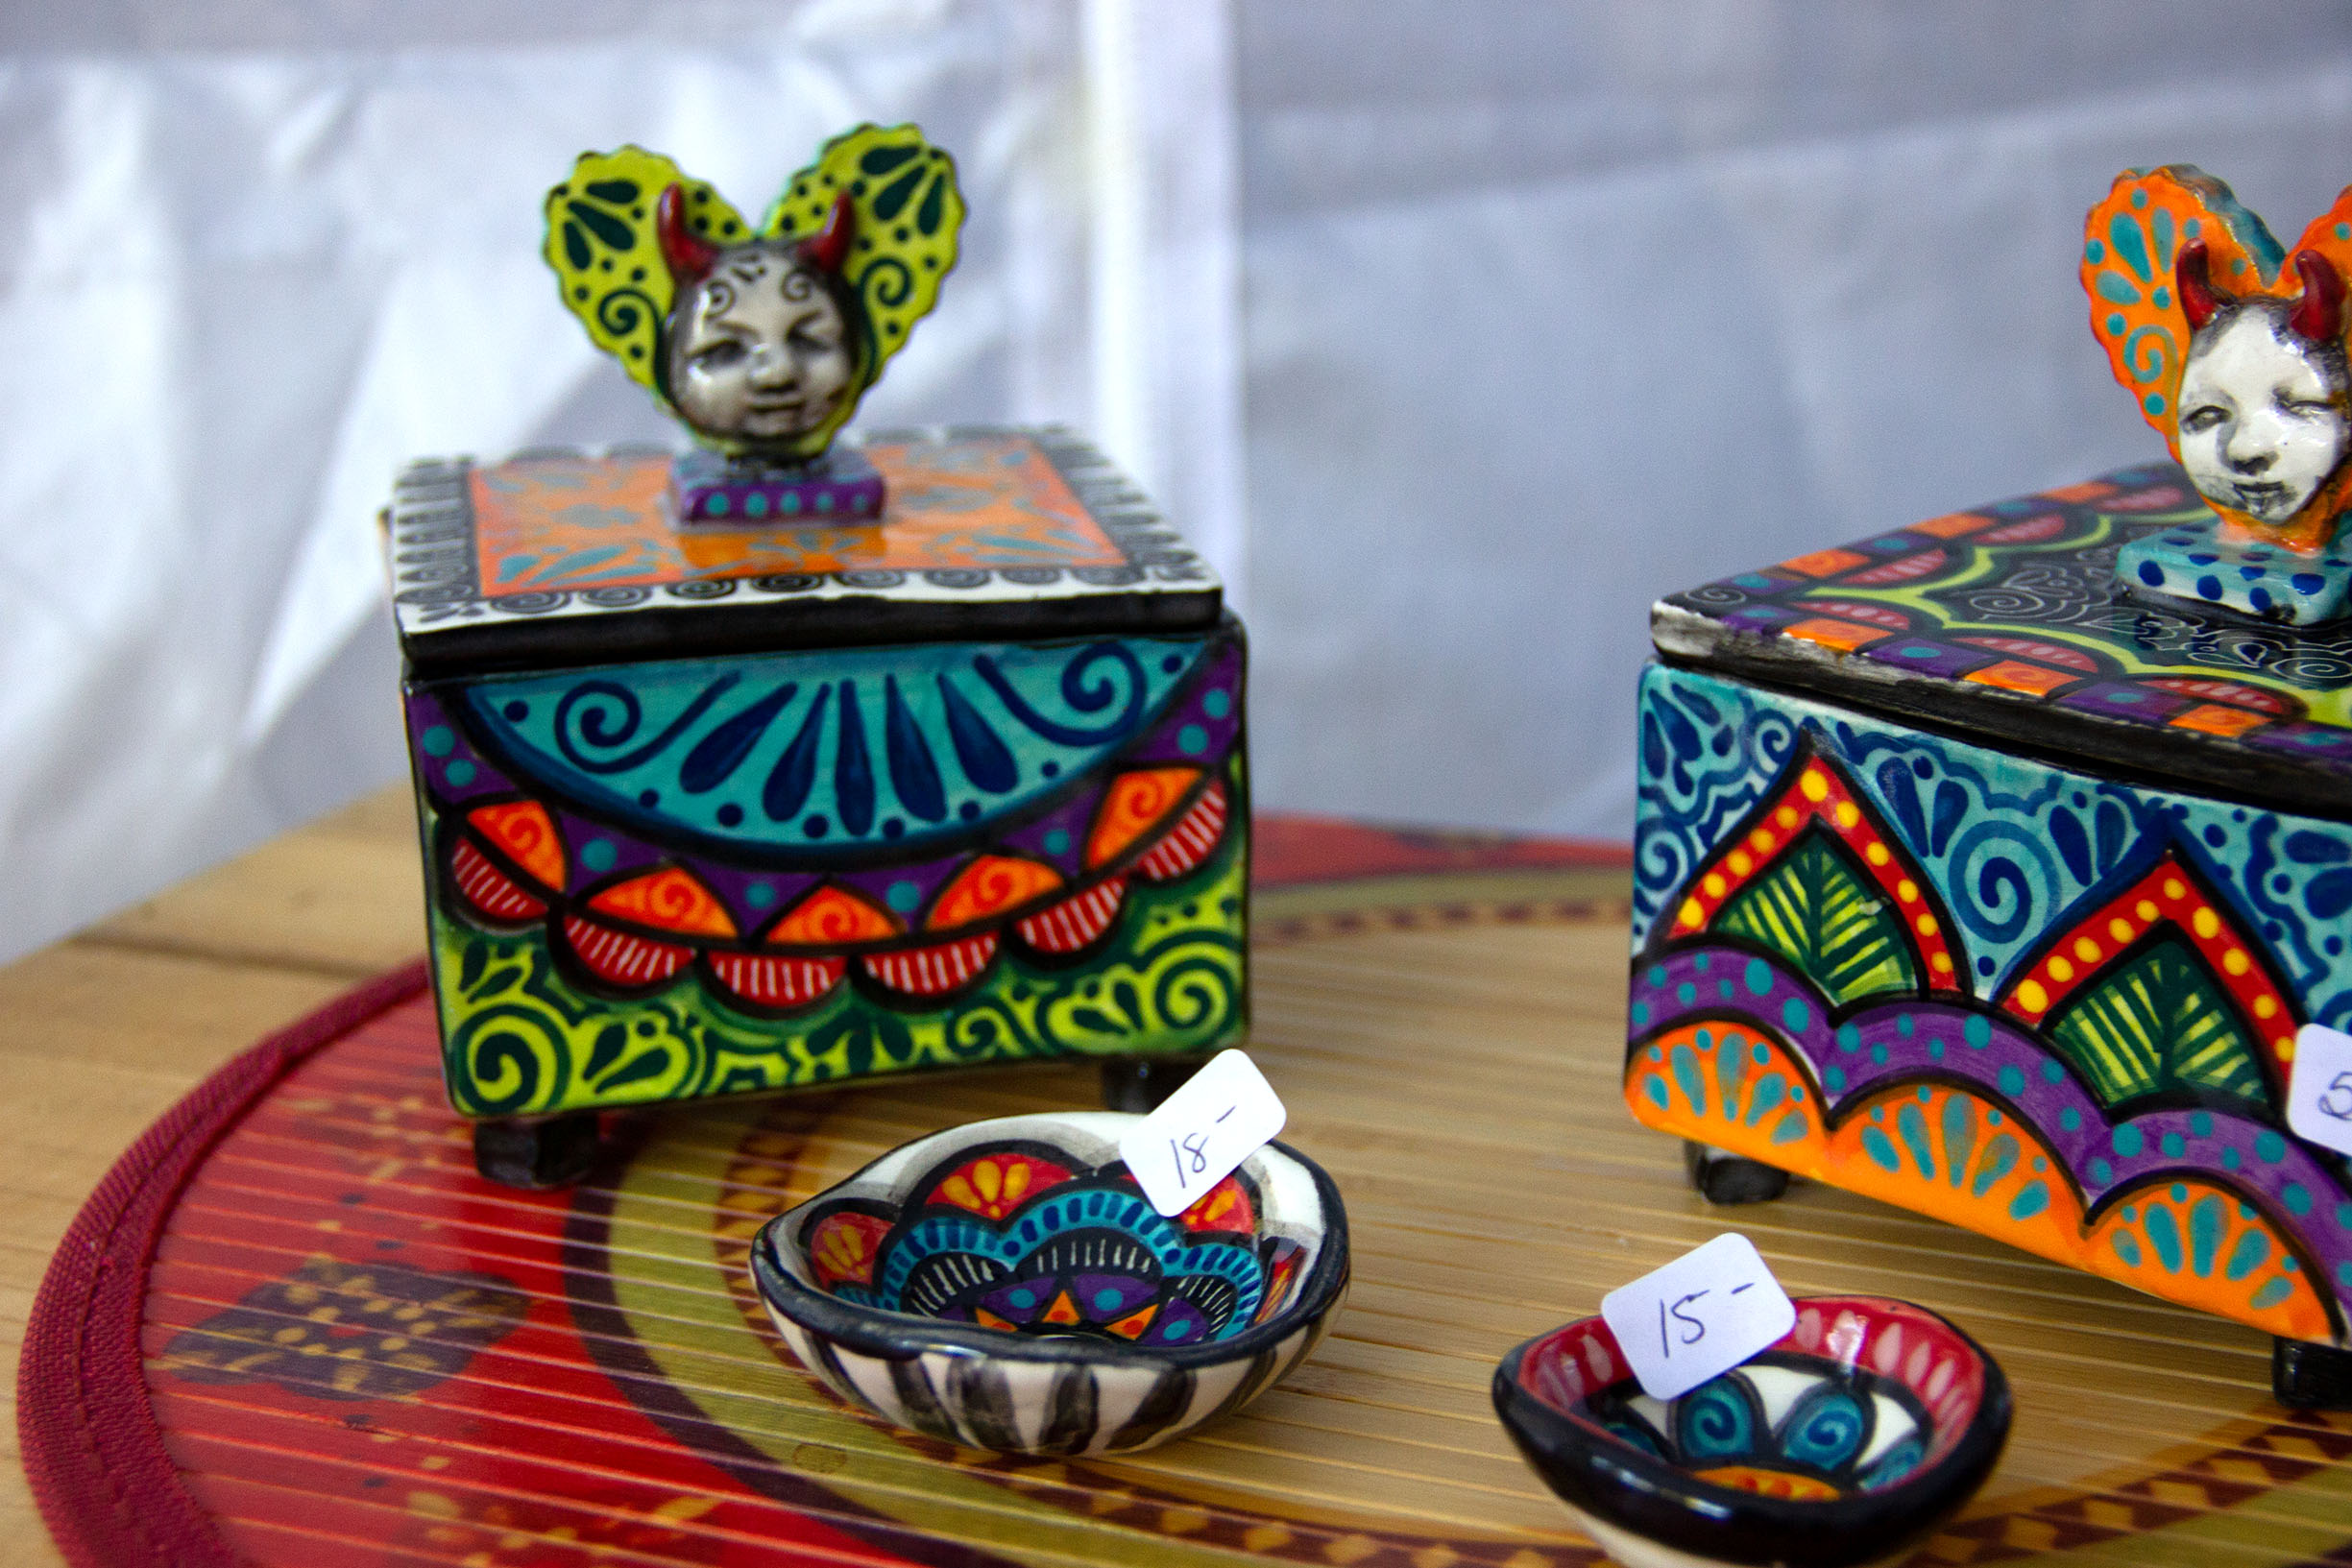 PHOTO: Traveling from San Angelo, Texas, Michelle Cuevas handbuilds functional art such as boxes, plates and cups. Cuevas also creates Dia de los muertos influneced work showing symbols of death next to colors associated with life. Photo by The Signal Online Editor Alyssa Shotwell.